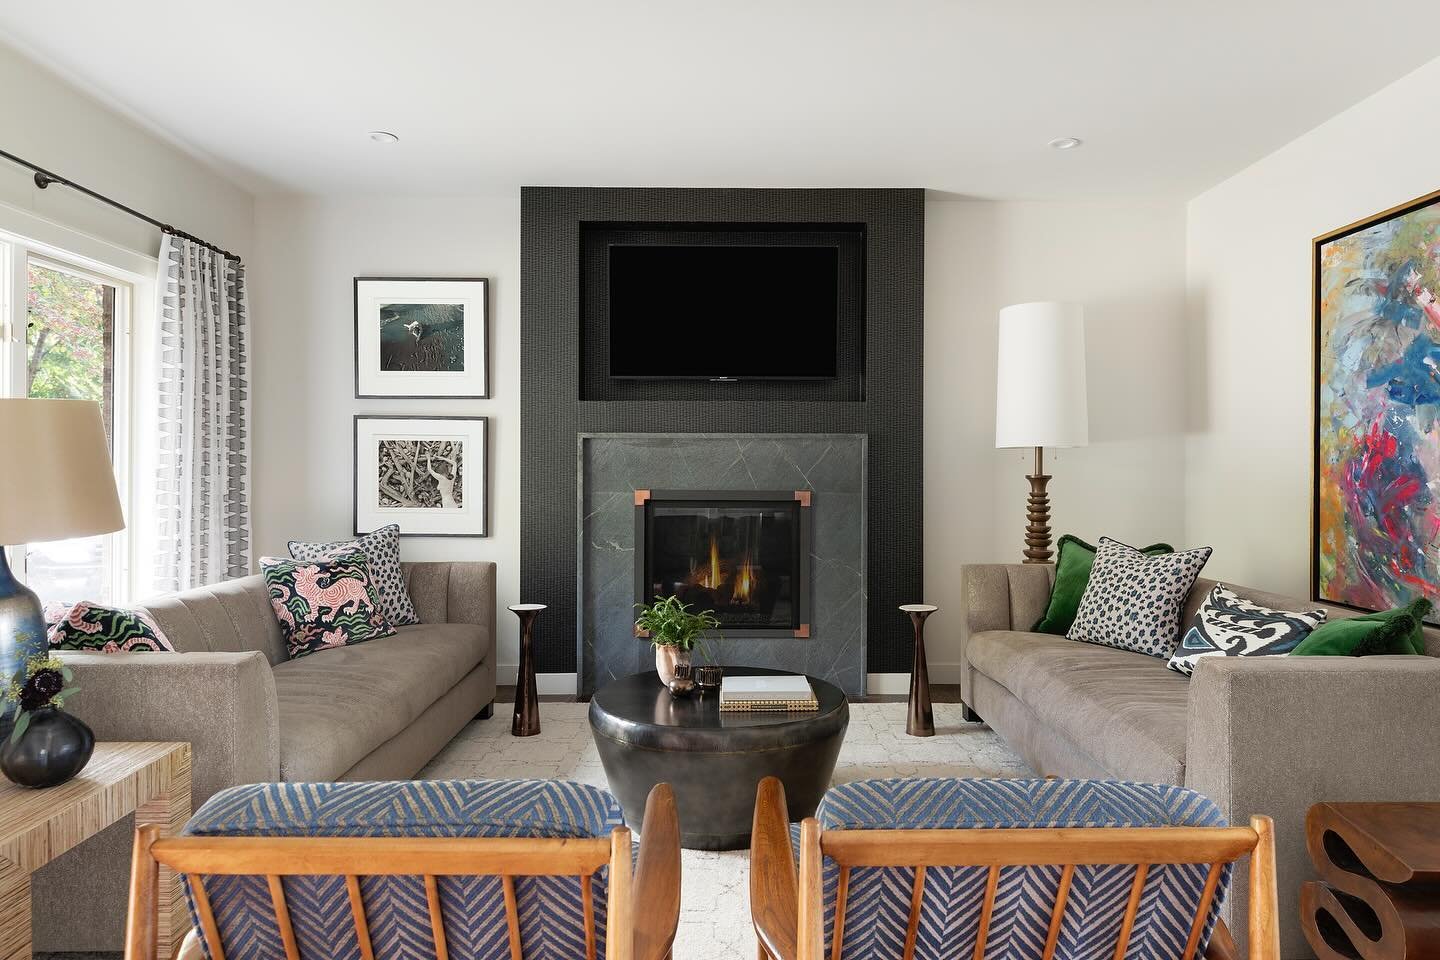 The age-old TV and fireplace problem solved with a custom niche, black wallpaper, and a bracket that allows the TV to pull down. No more creaky necks! 

Photo: @spacecrafting_photography

#heatherpetersondesign #masterthemix #interiordesign #minneapo